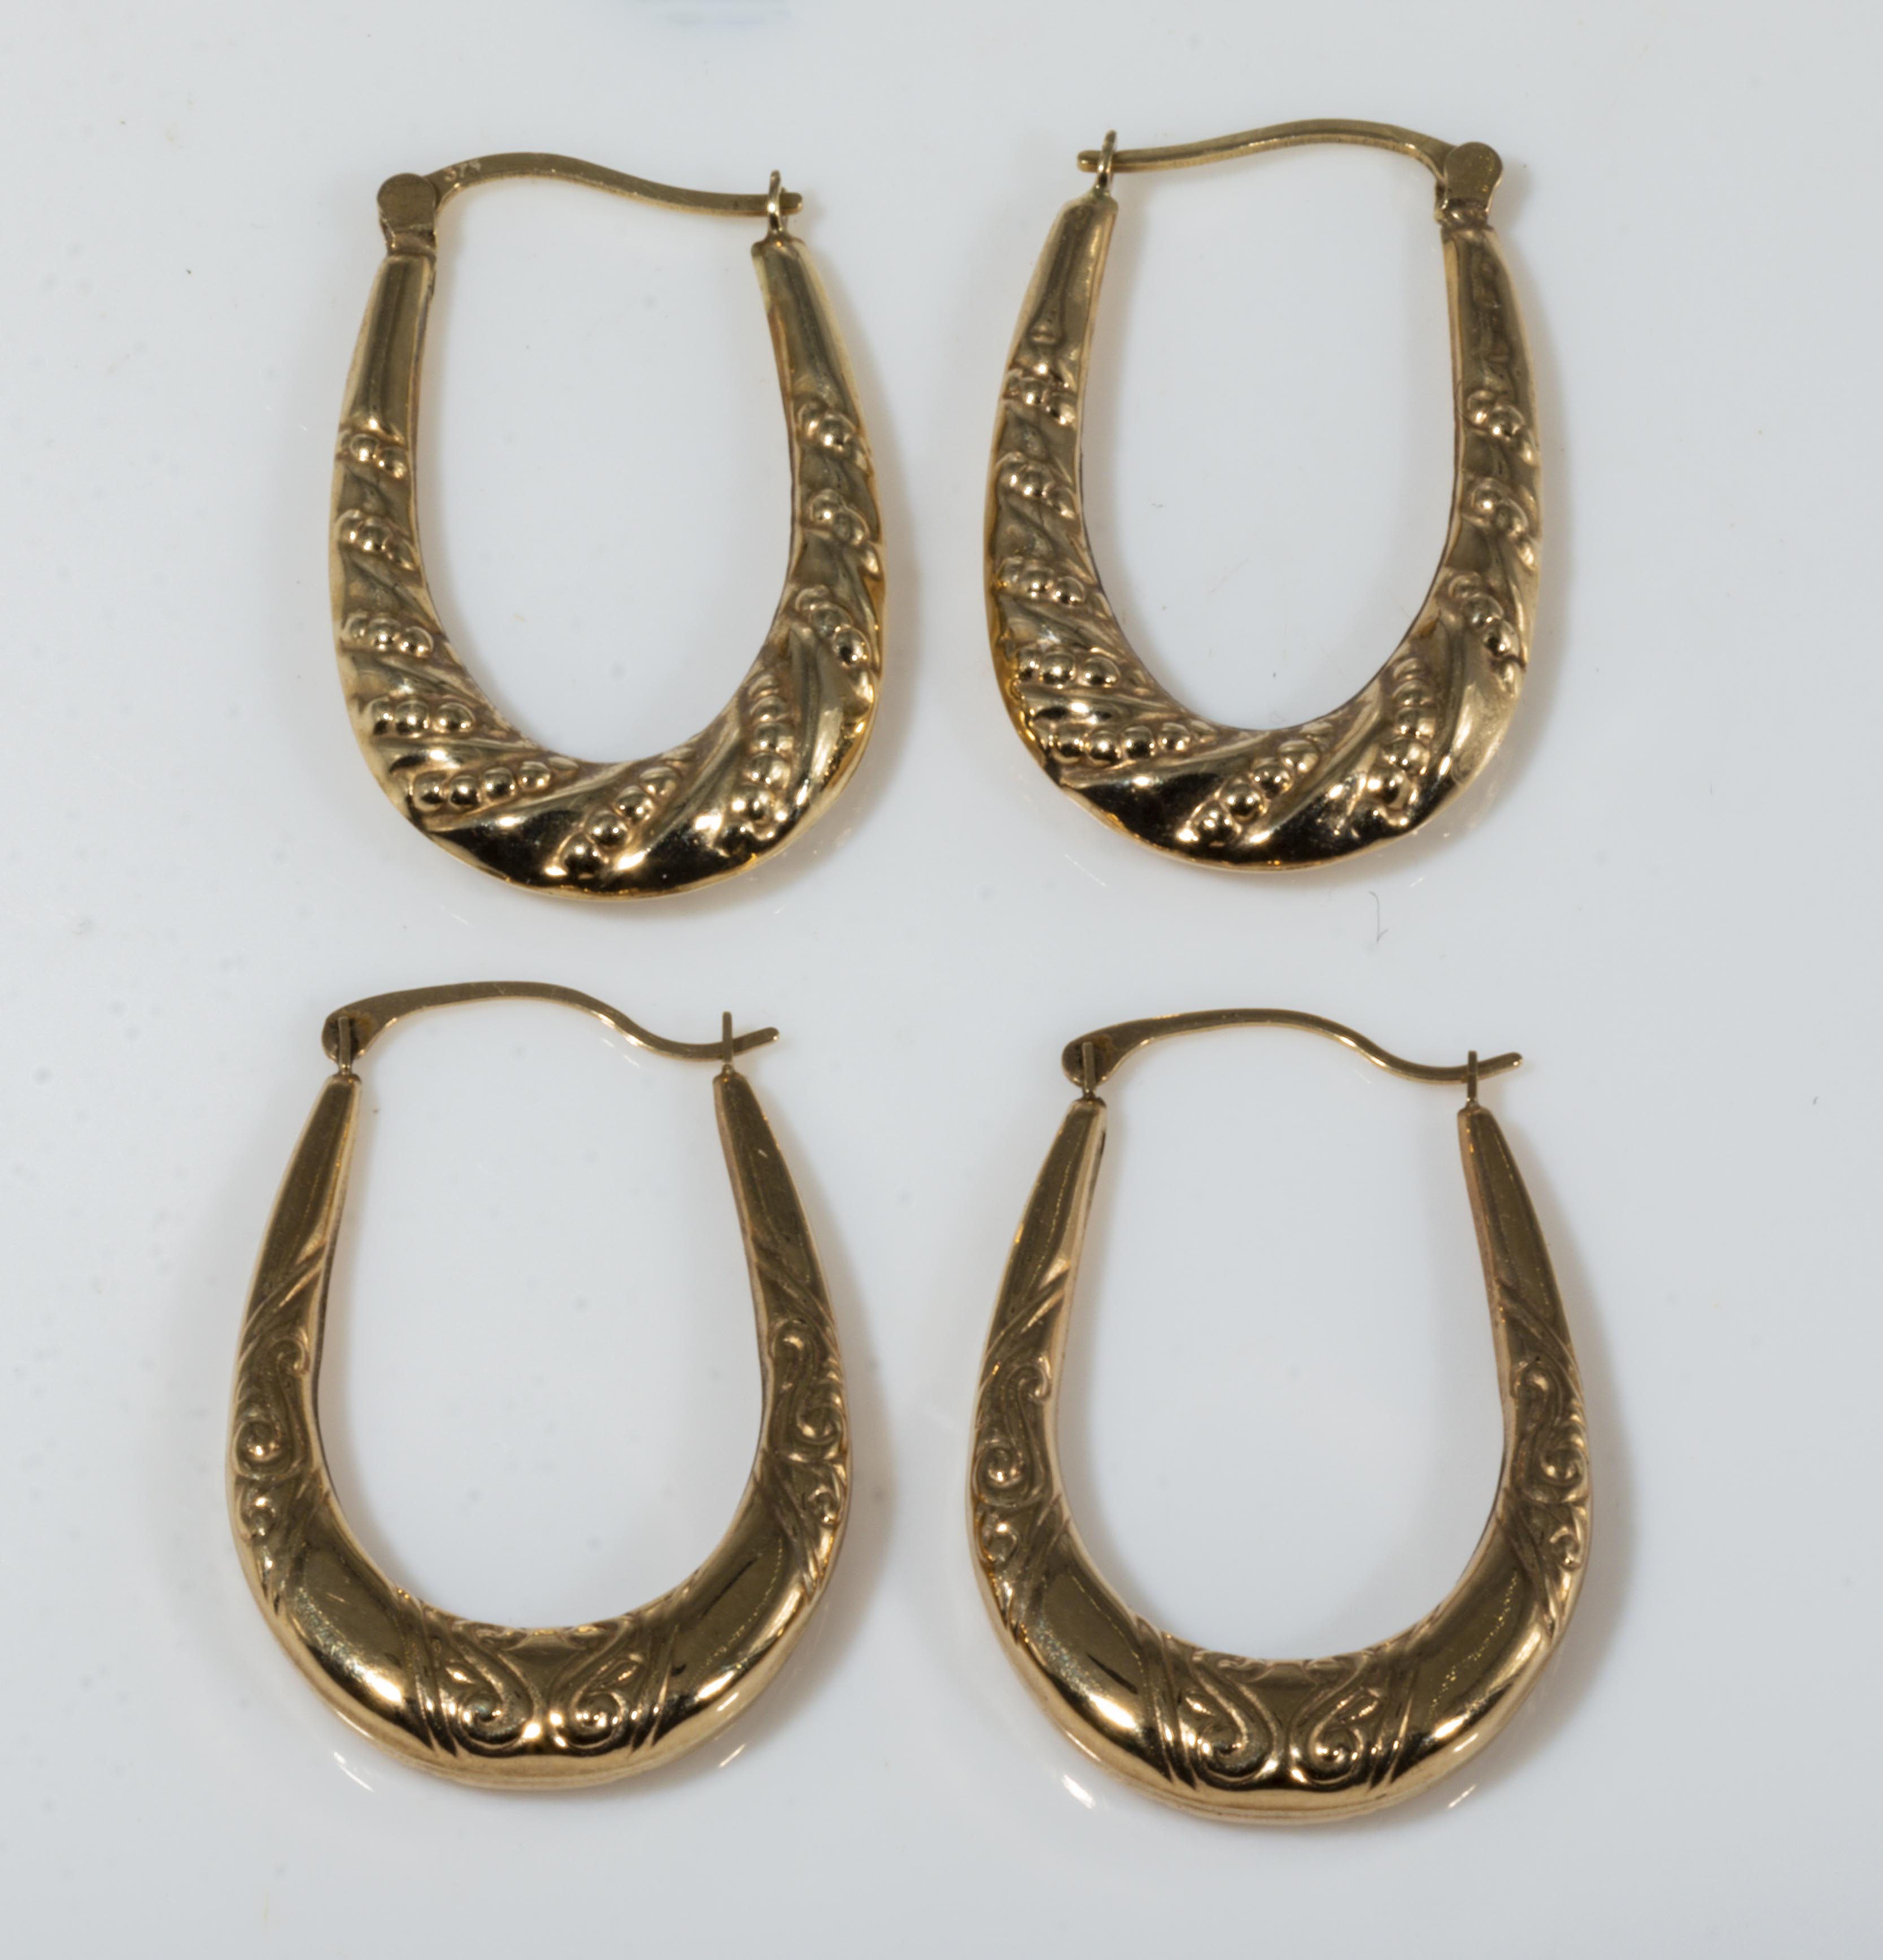 Two pairs of 9ct gold horseshoe shaped earrings